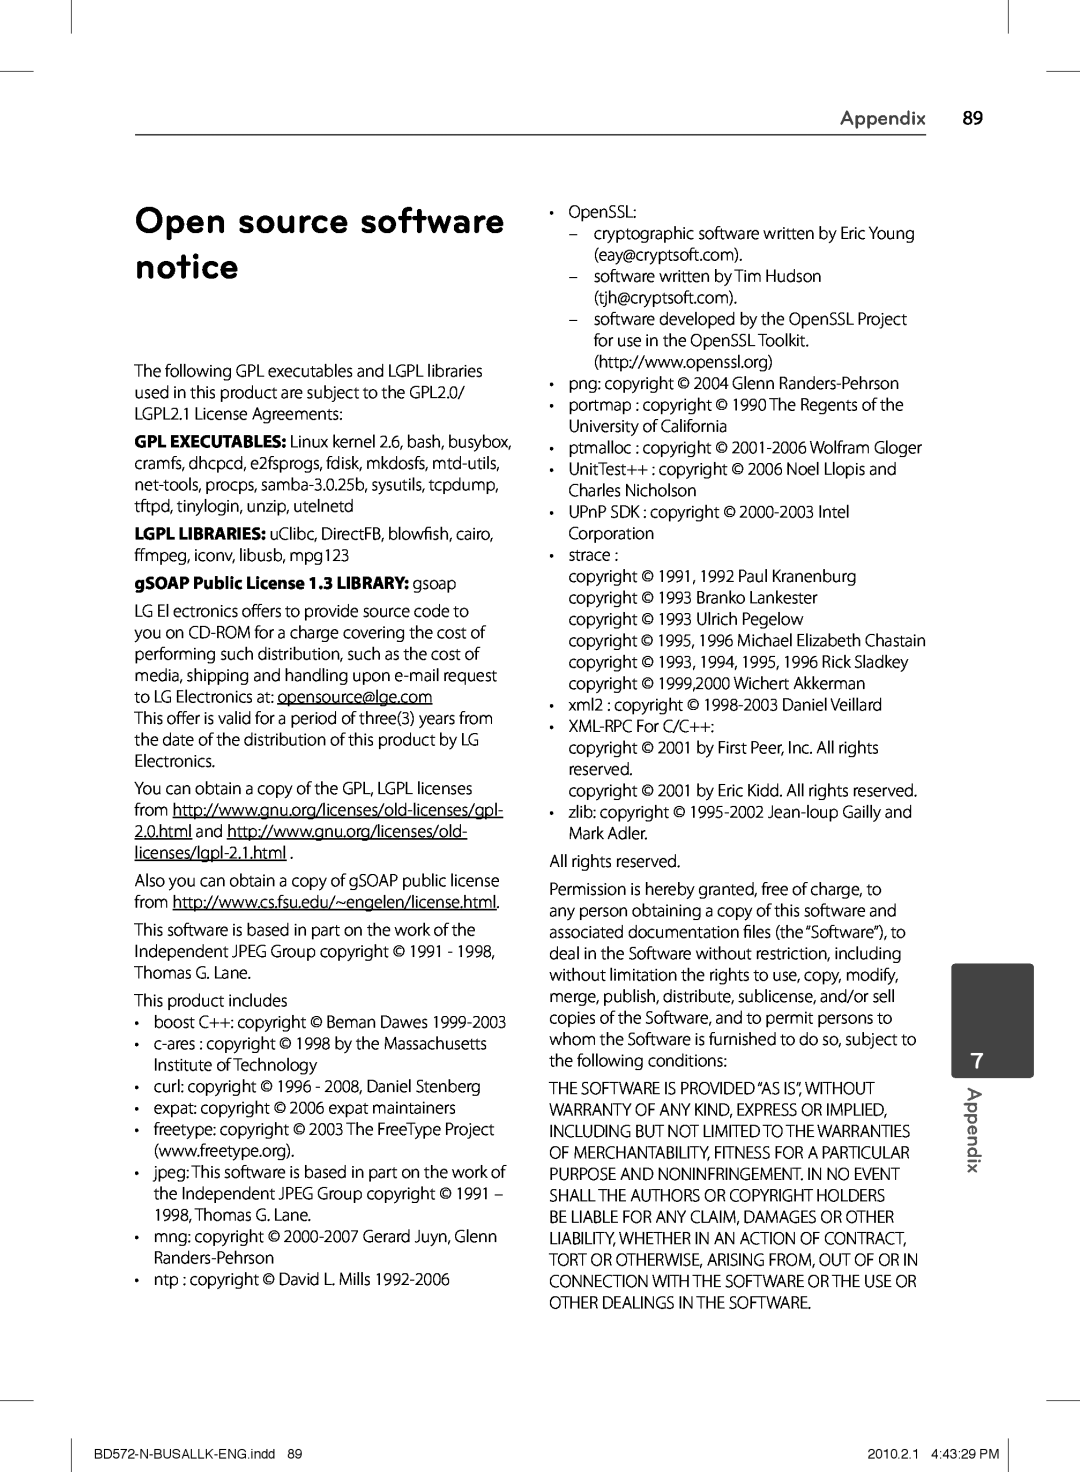 LG Electronics BD570 owner manual Open source software notice, Appendix, gSOAP Public License 1.3 LIBRARY gsoap 